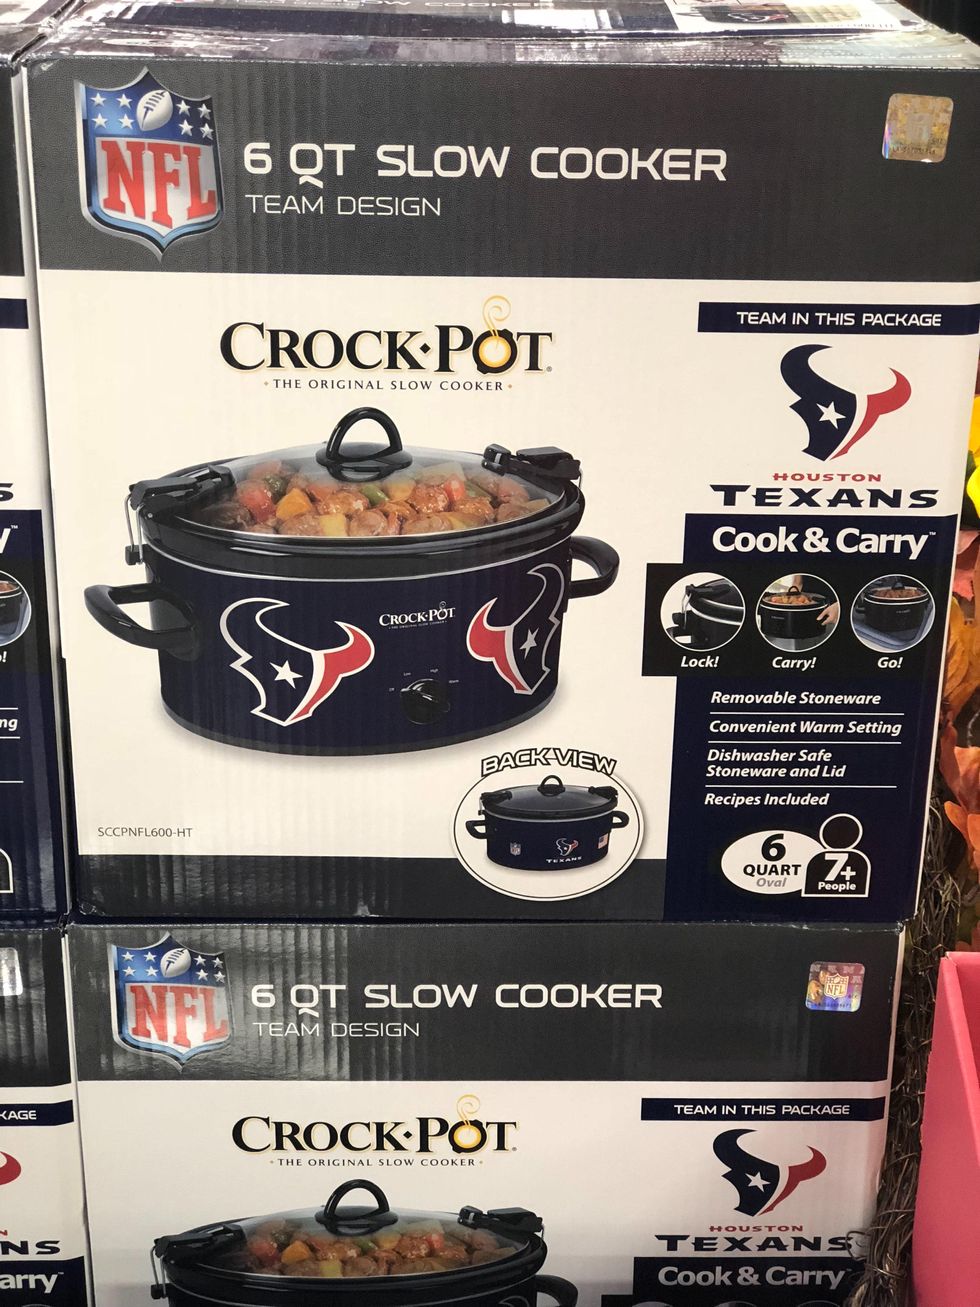 Comparing Houston sports teams and players to everyday items